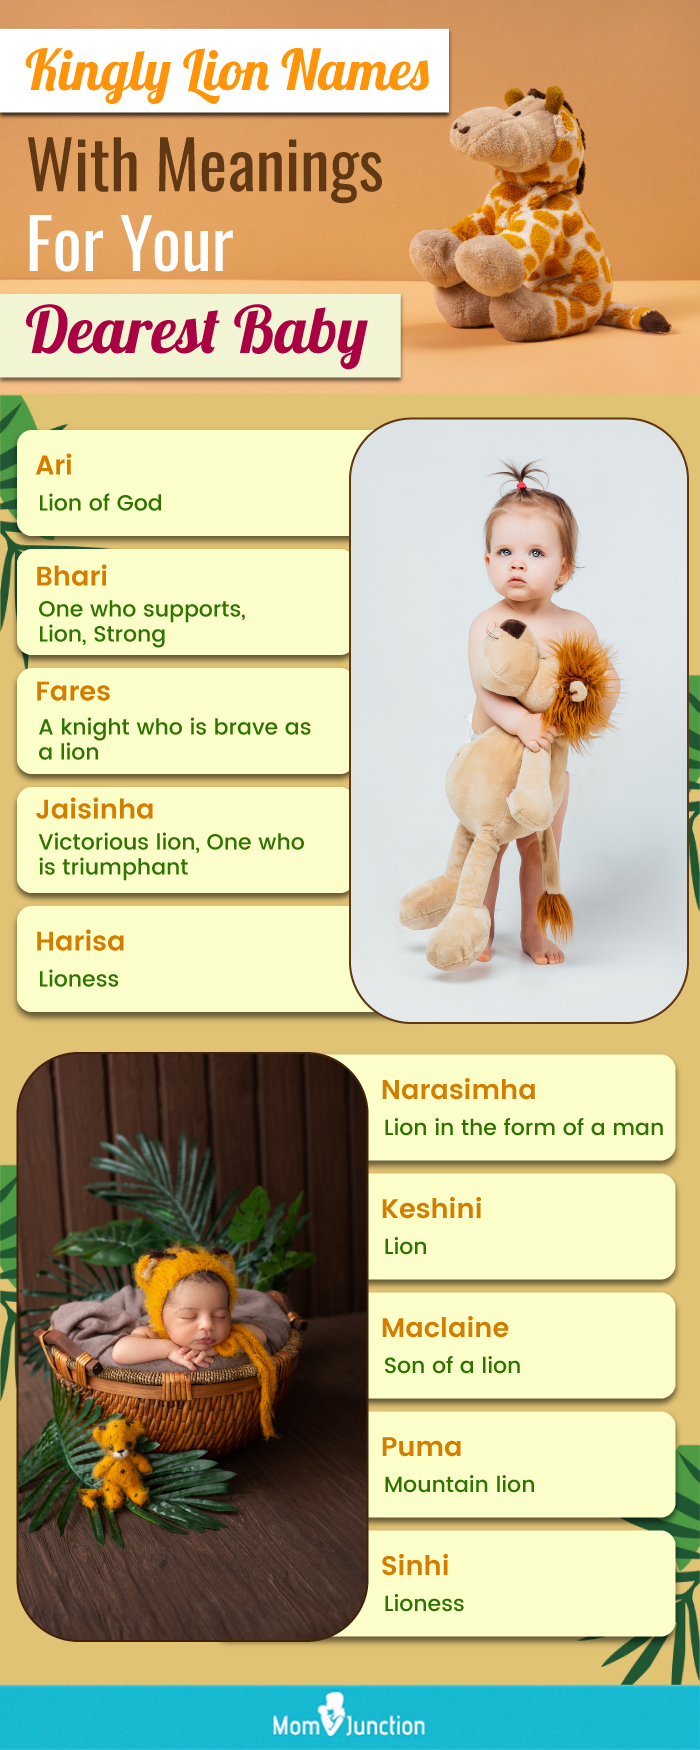 kingly lion names with meanings for your dearest baby (infographic)